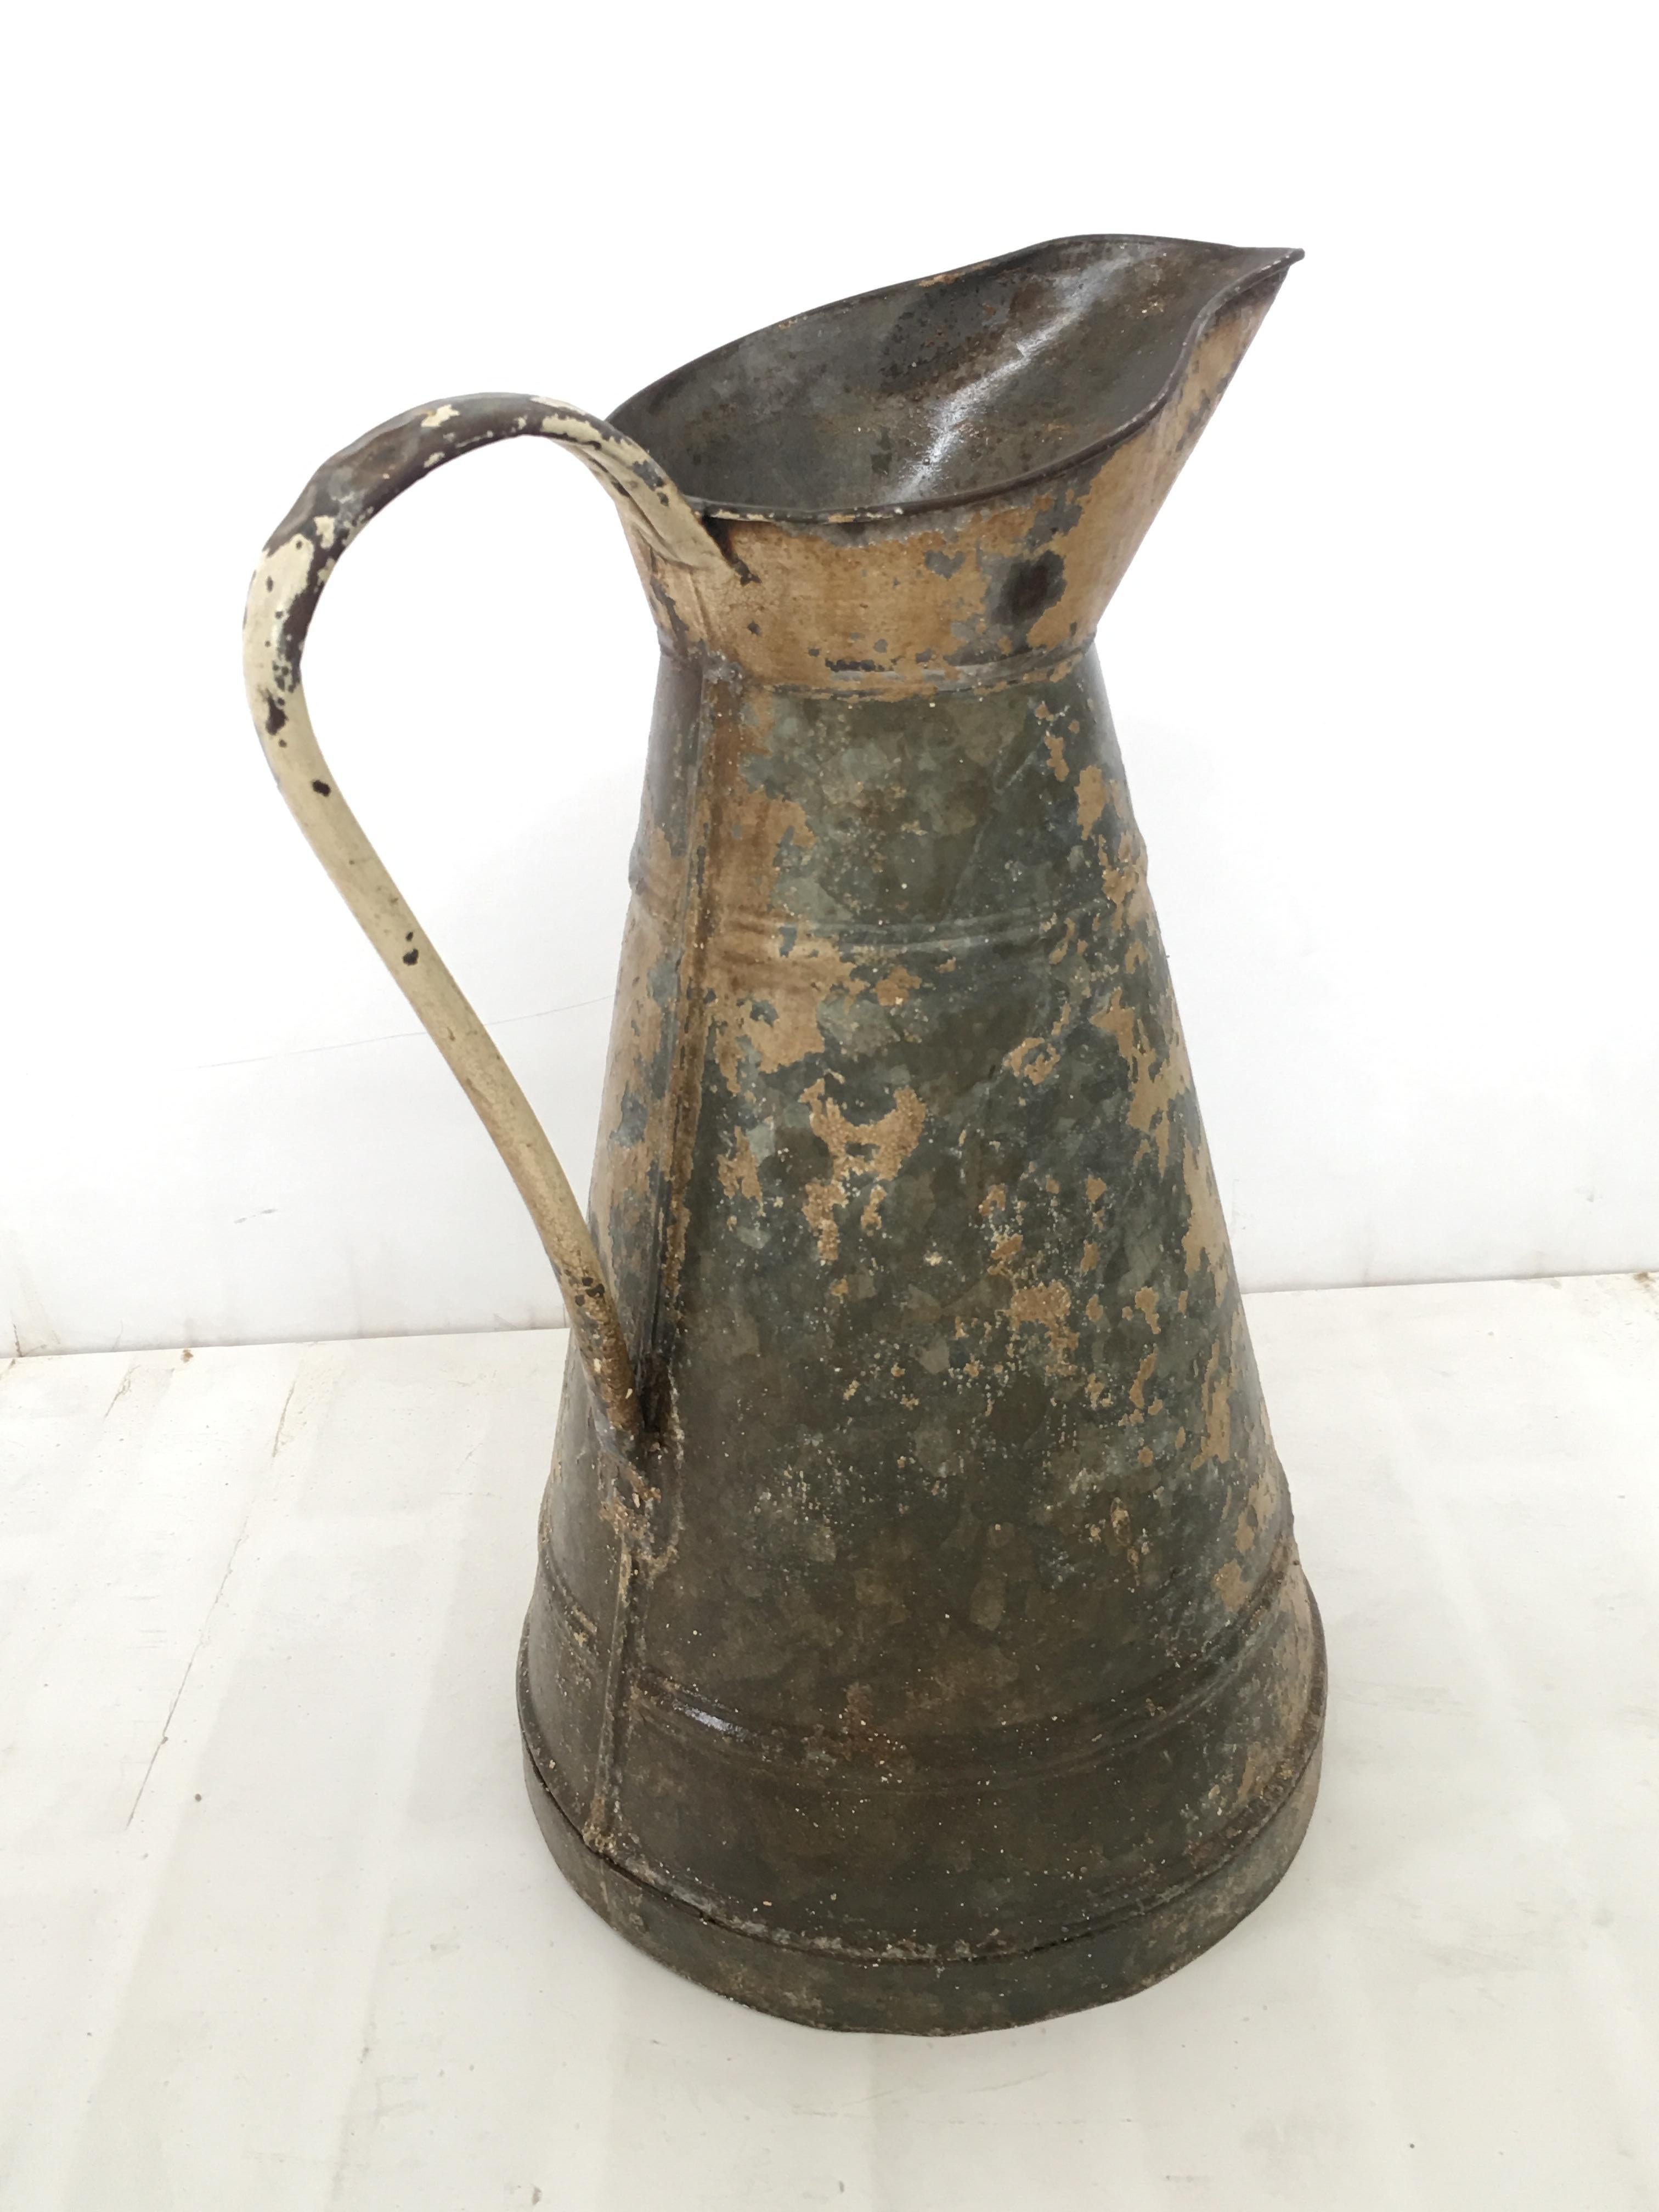 Large English metal pitcher, late 19th century.
A handsome early 20th century copper jug with a distinctive patina surface decoration.
The large pitcher displays well with a lovely, old patina complimenting a sleek, tapering shape with